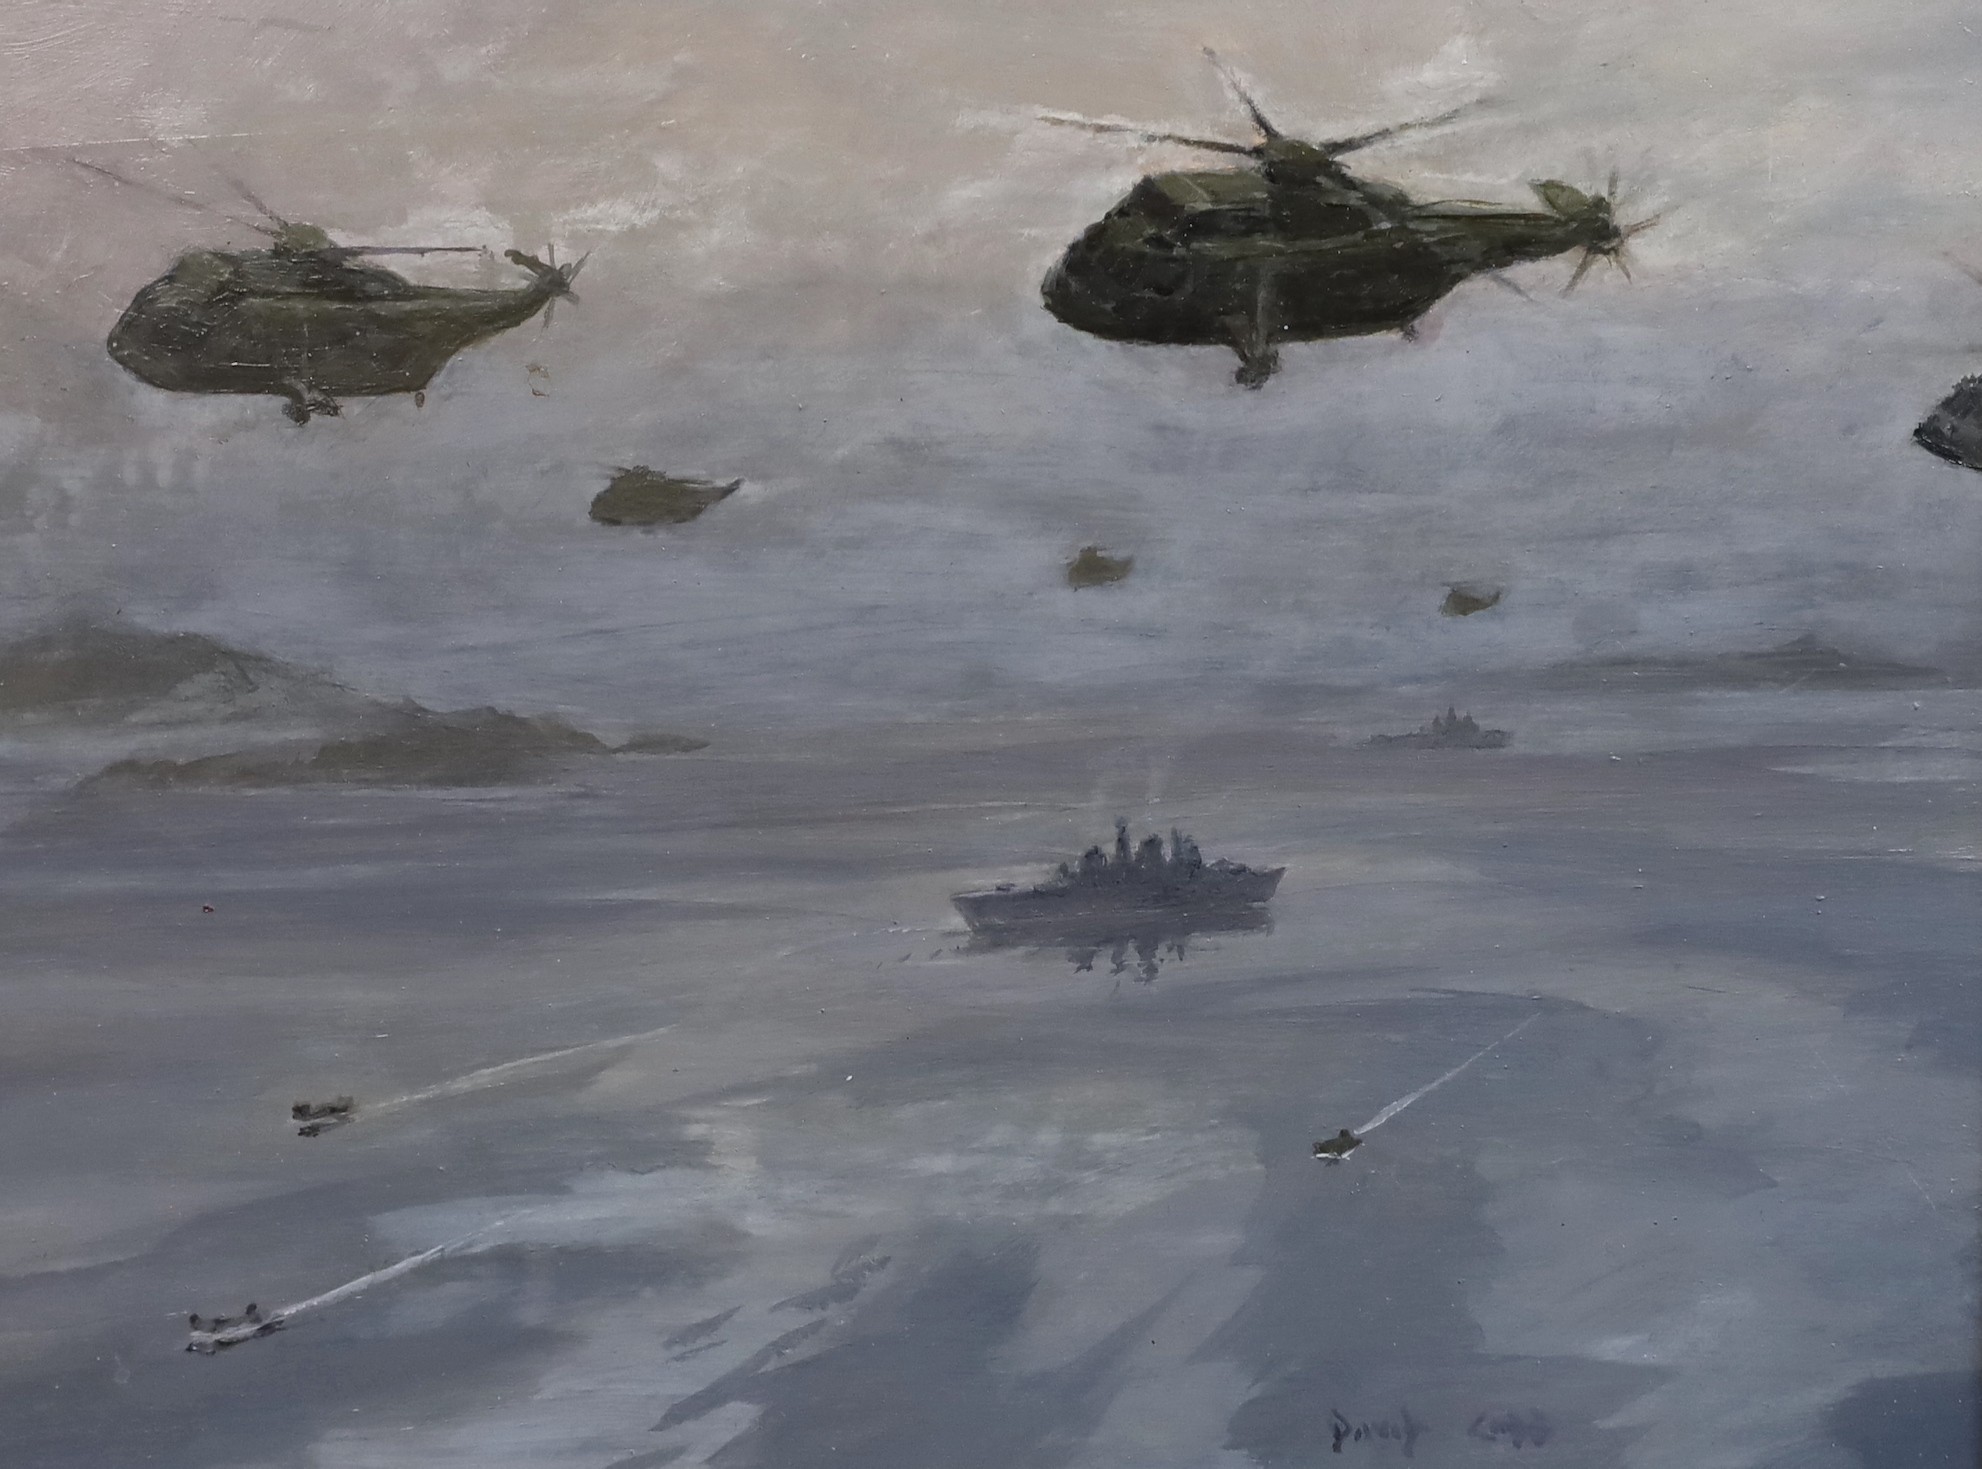 David Cobb (British, 1921-2014), Sea King Helicopters and Warships, Falklands, oil on board, 29 x 39cm